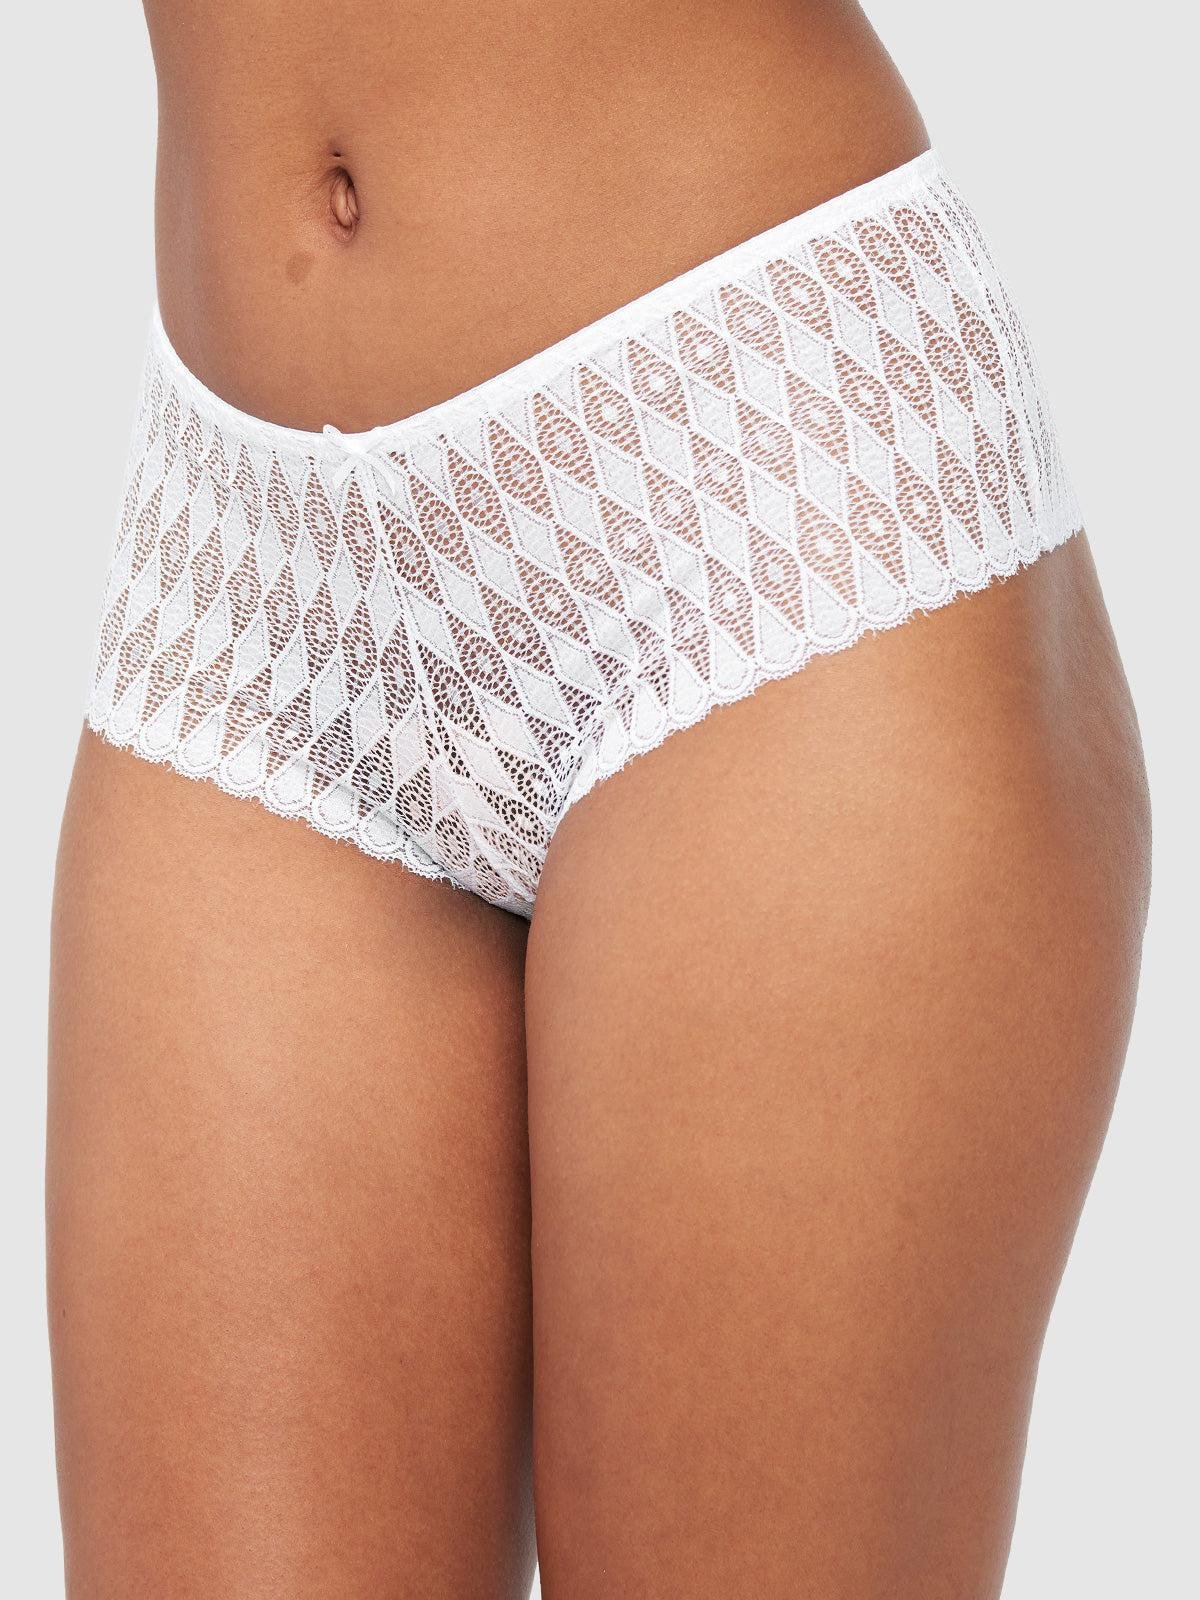 Ellison Lace Cheeky in White by FREDERICK'S OF HOLLYWOOD